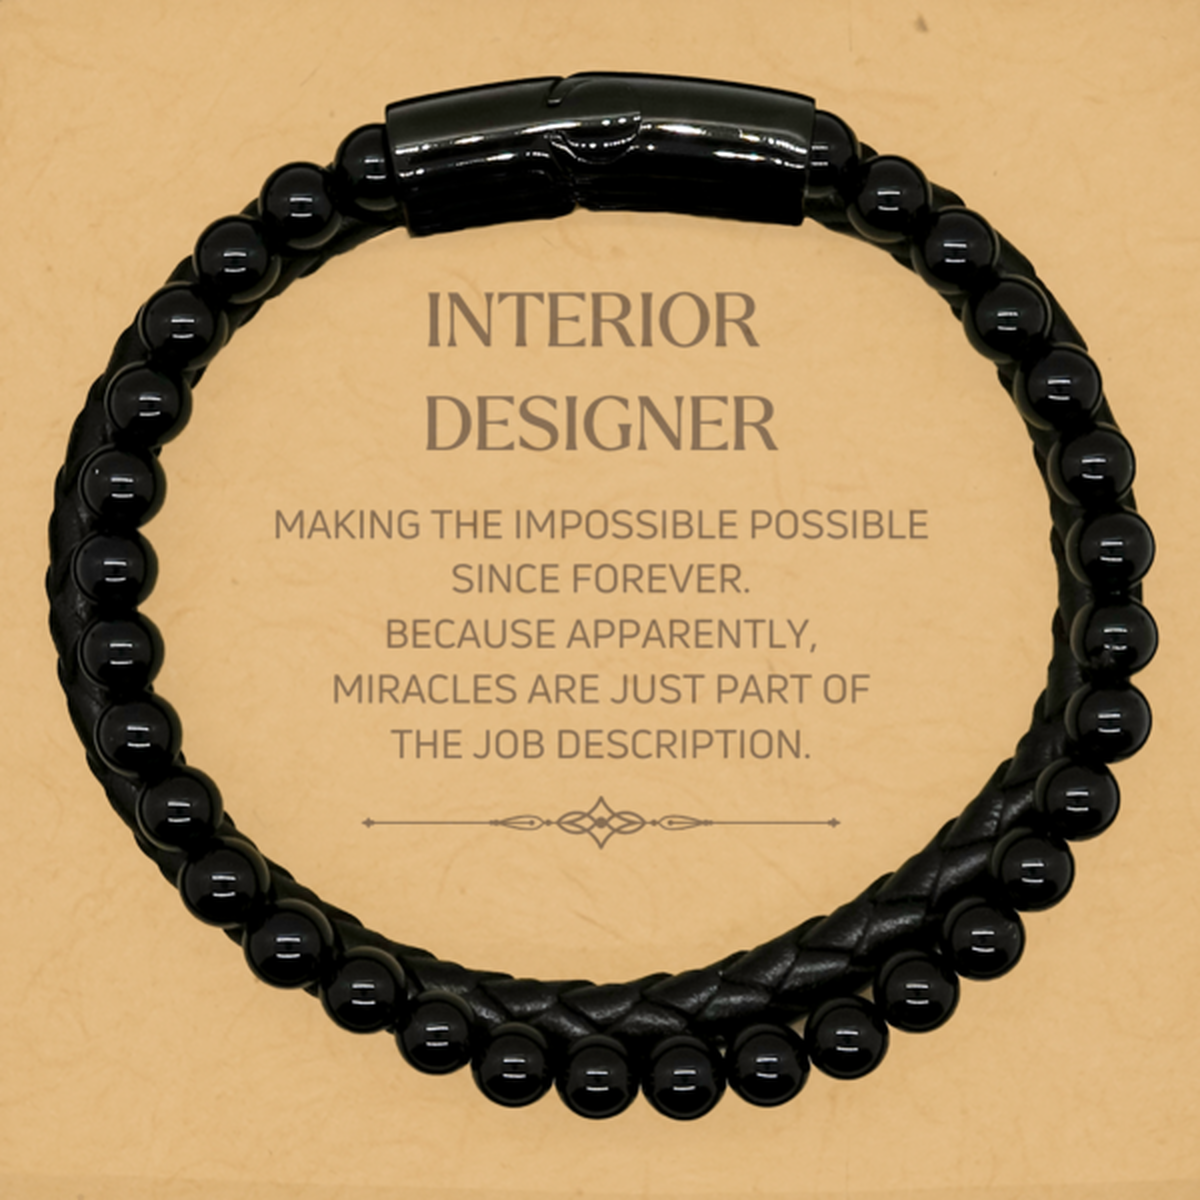 Funny Interior Designer Gifts, Miracles are just part of the job description, Inspirational Birthday Stone Leather Bracelets For Interior Designer, Men, Women, Coworkers, Friends, Boss